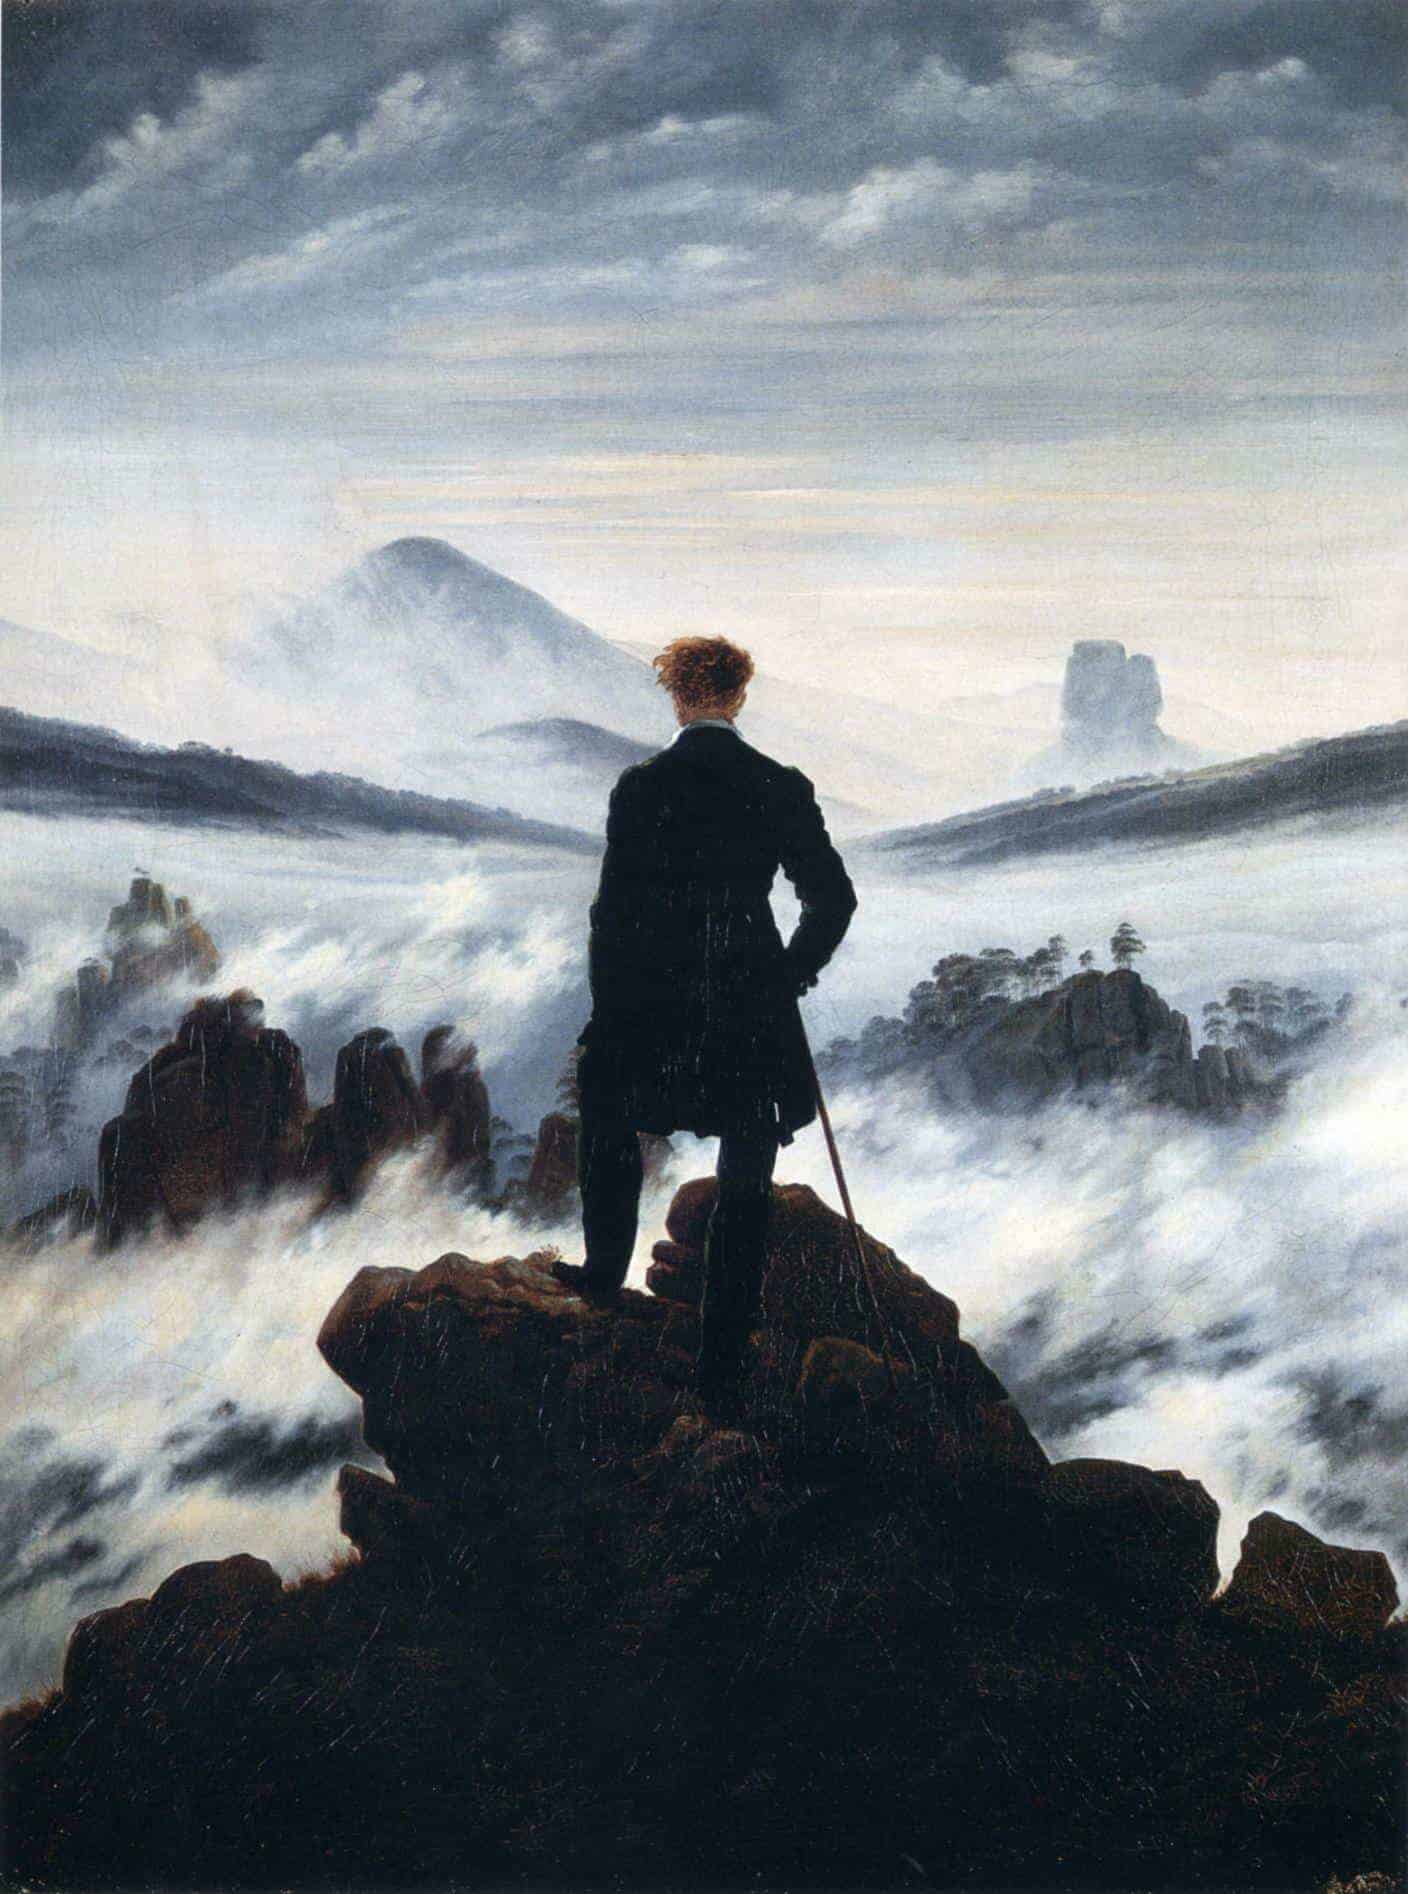 Wanderer above the Sea of Fog, an oil painting composed in 1818 by the German Romantic artist Caspar David Friedrich